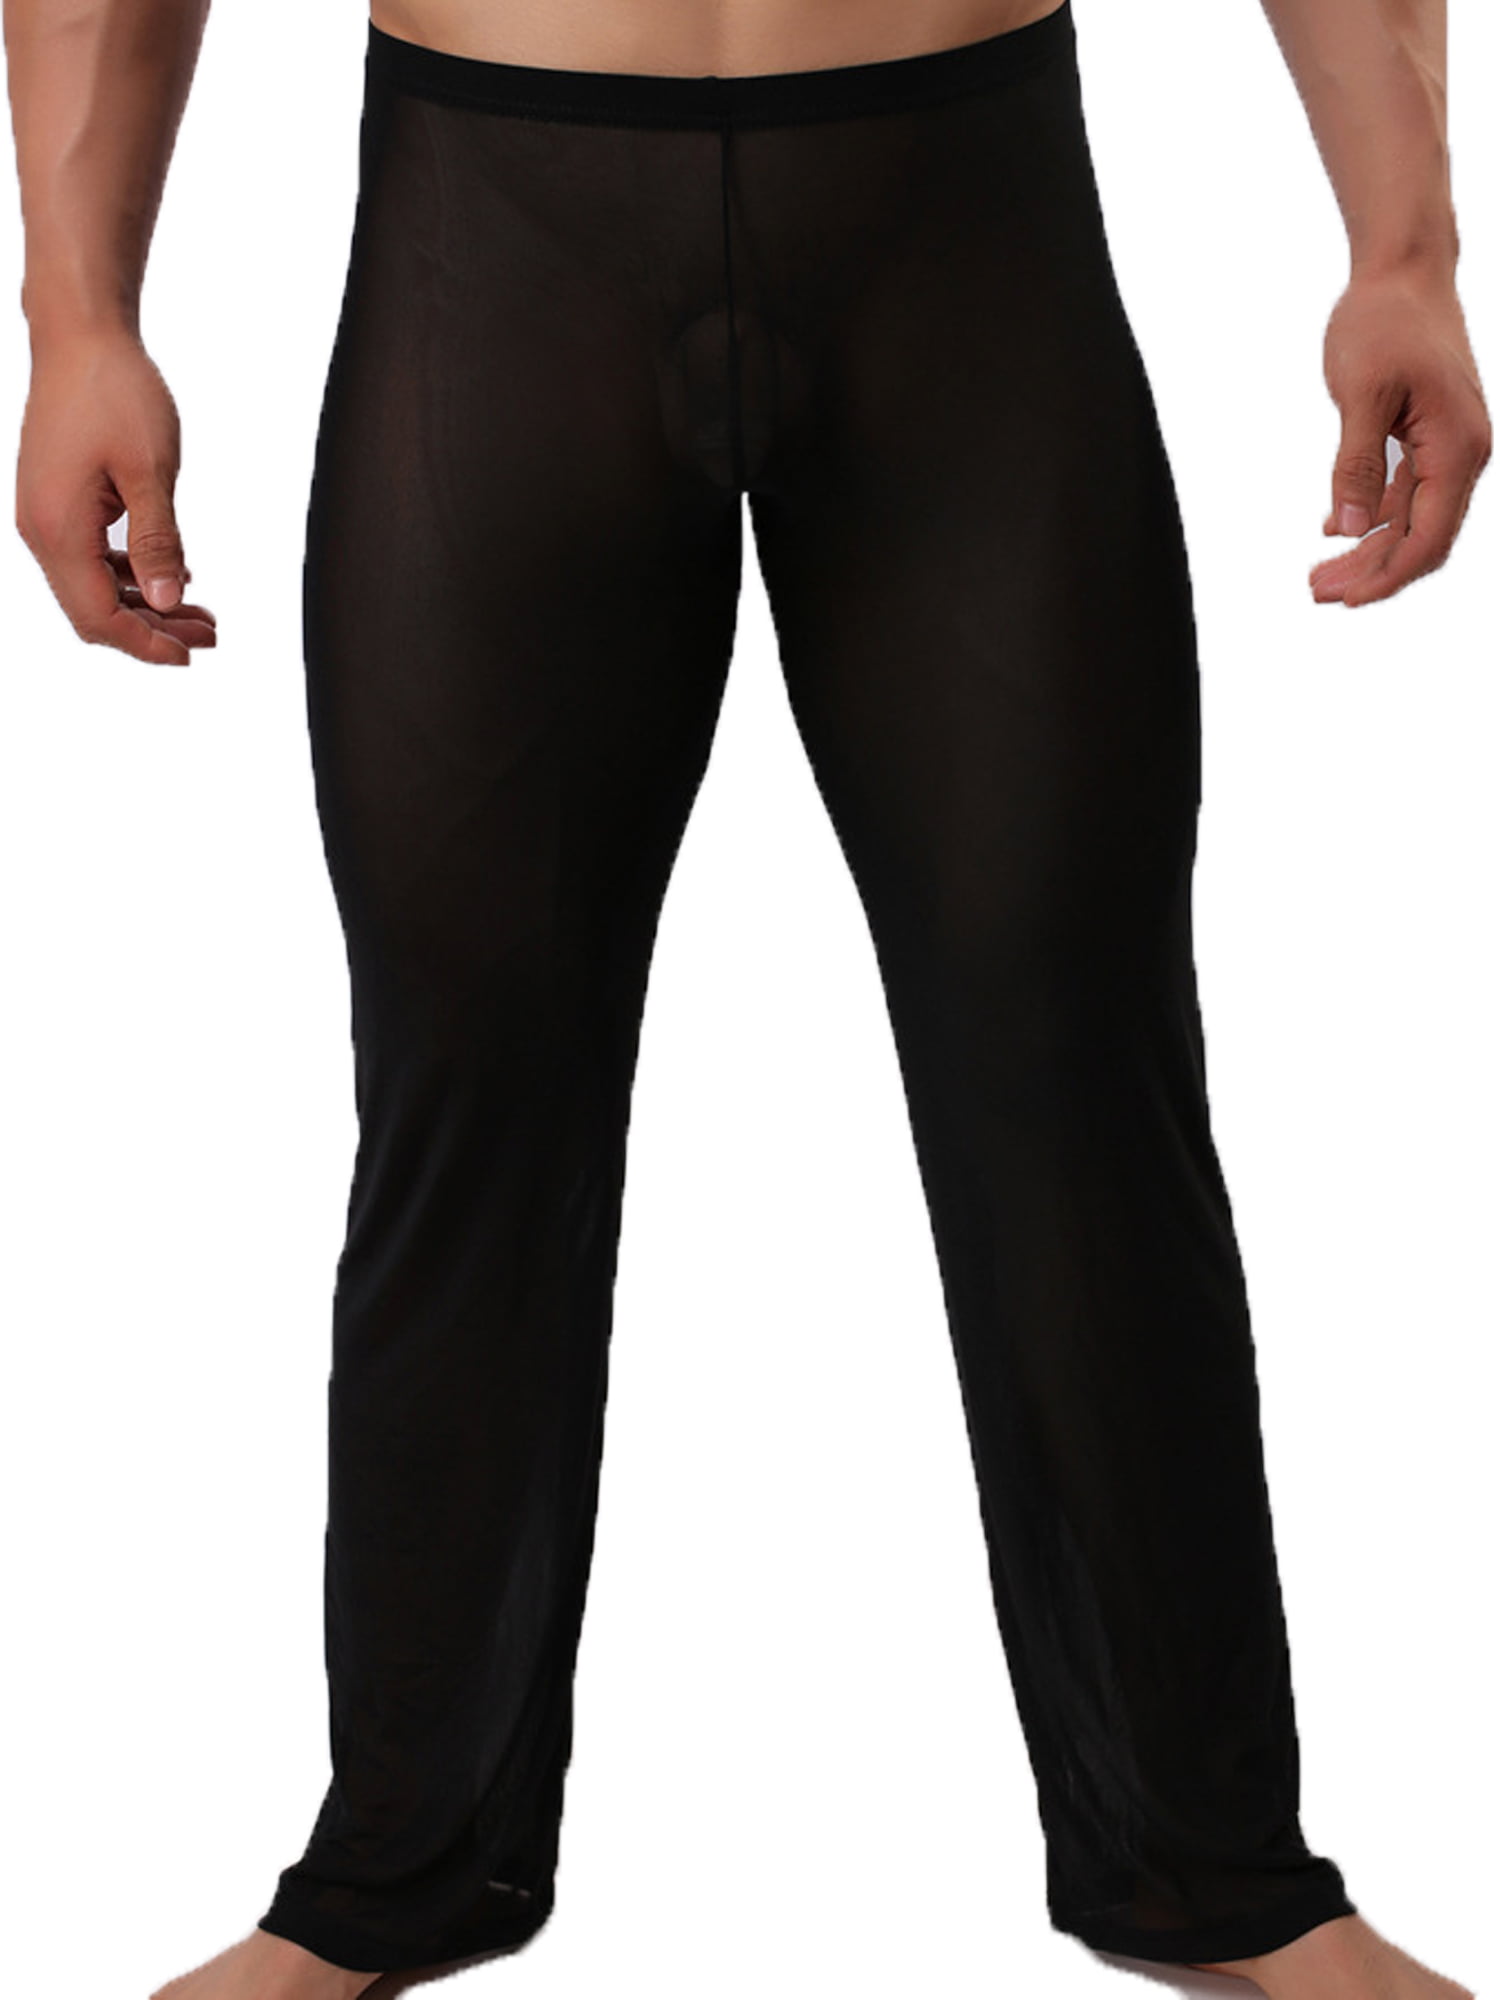 see through mens trousers Off 64%